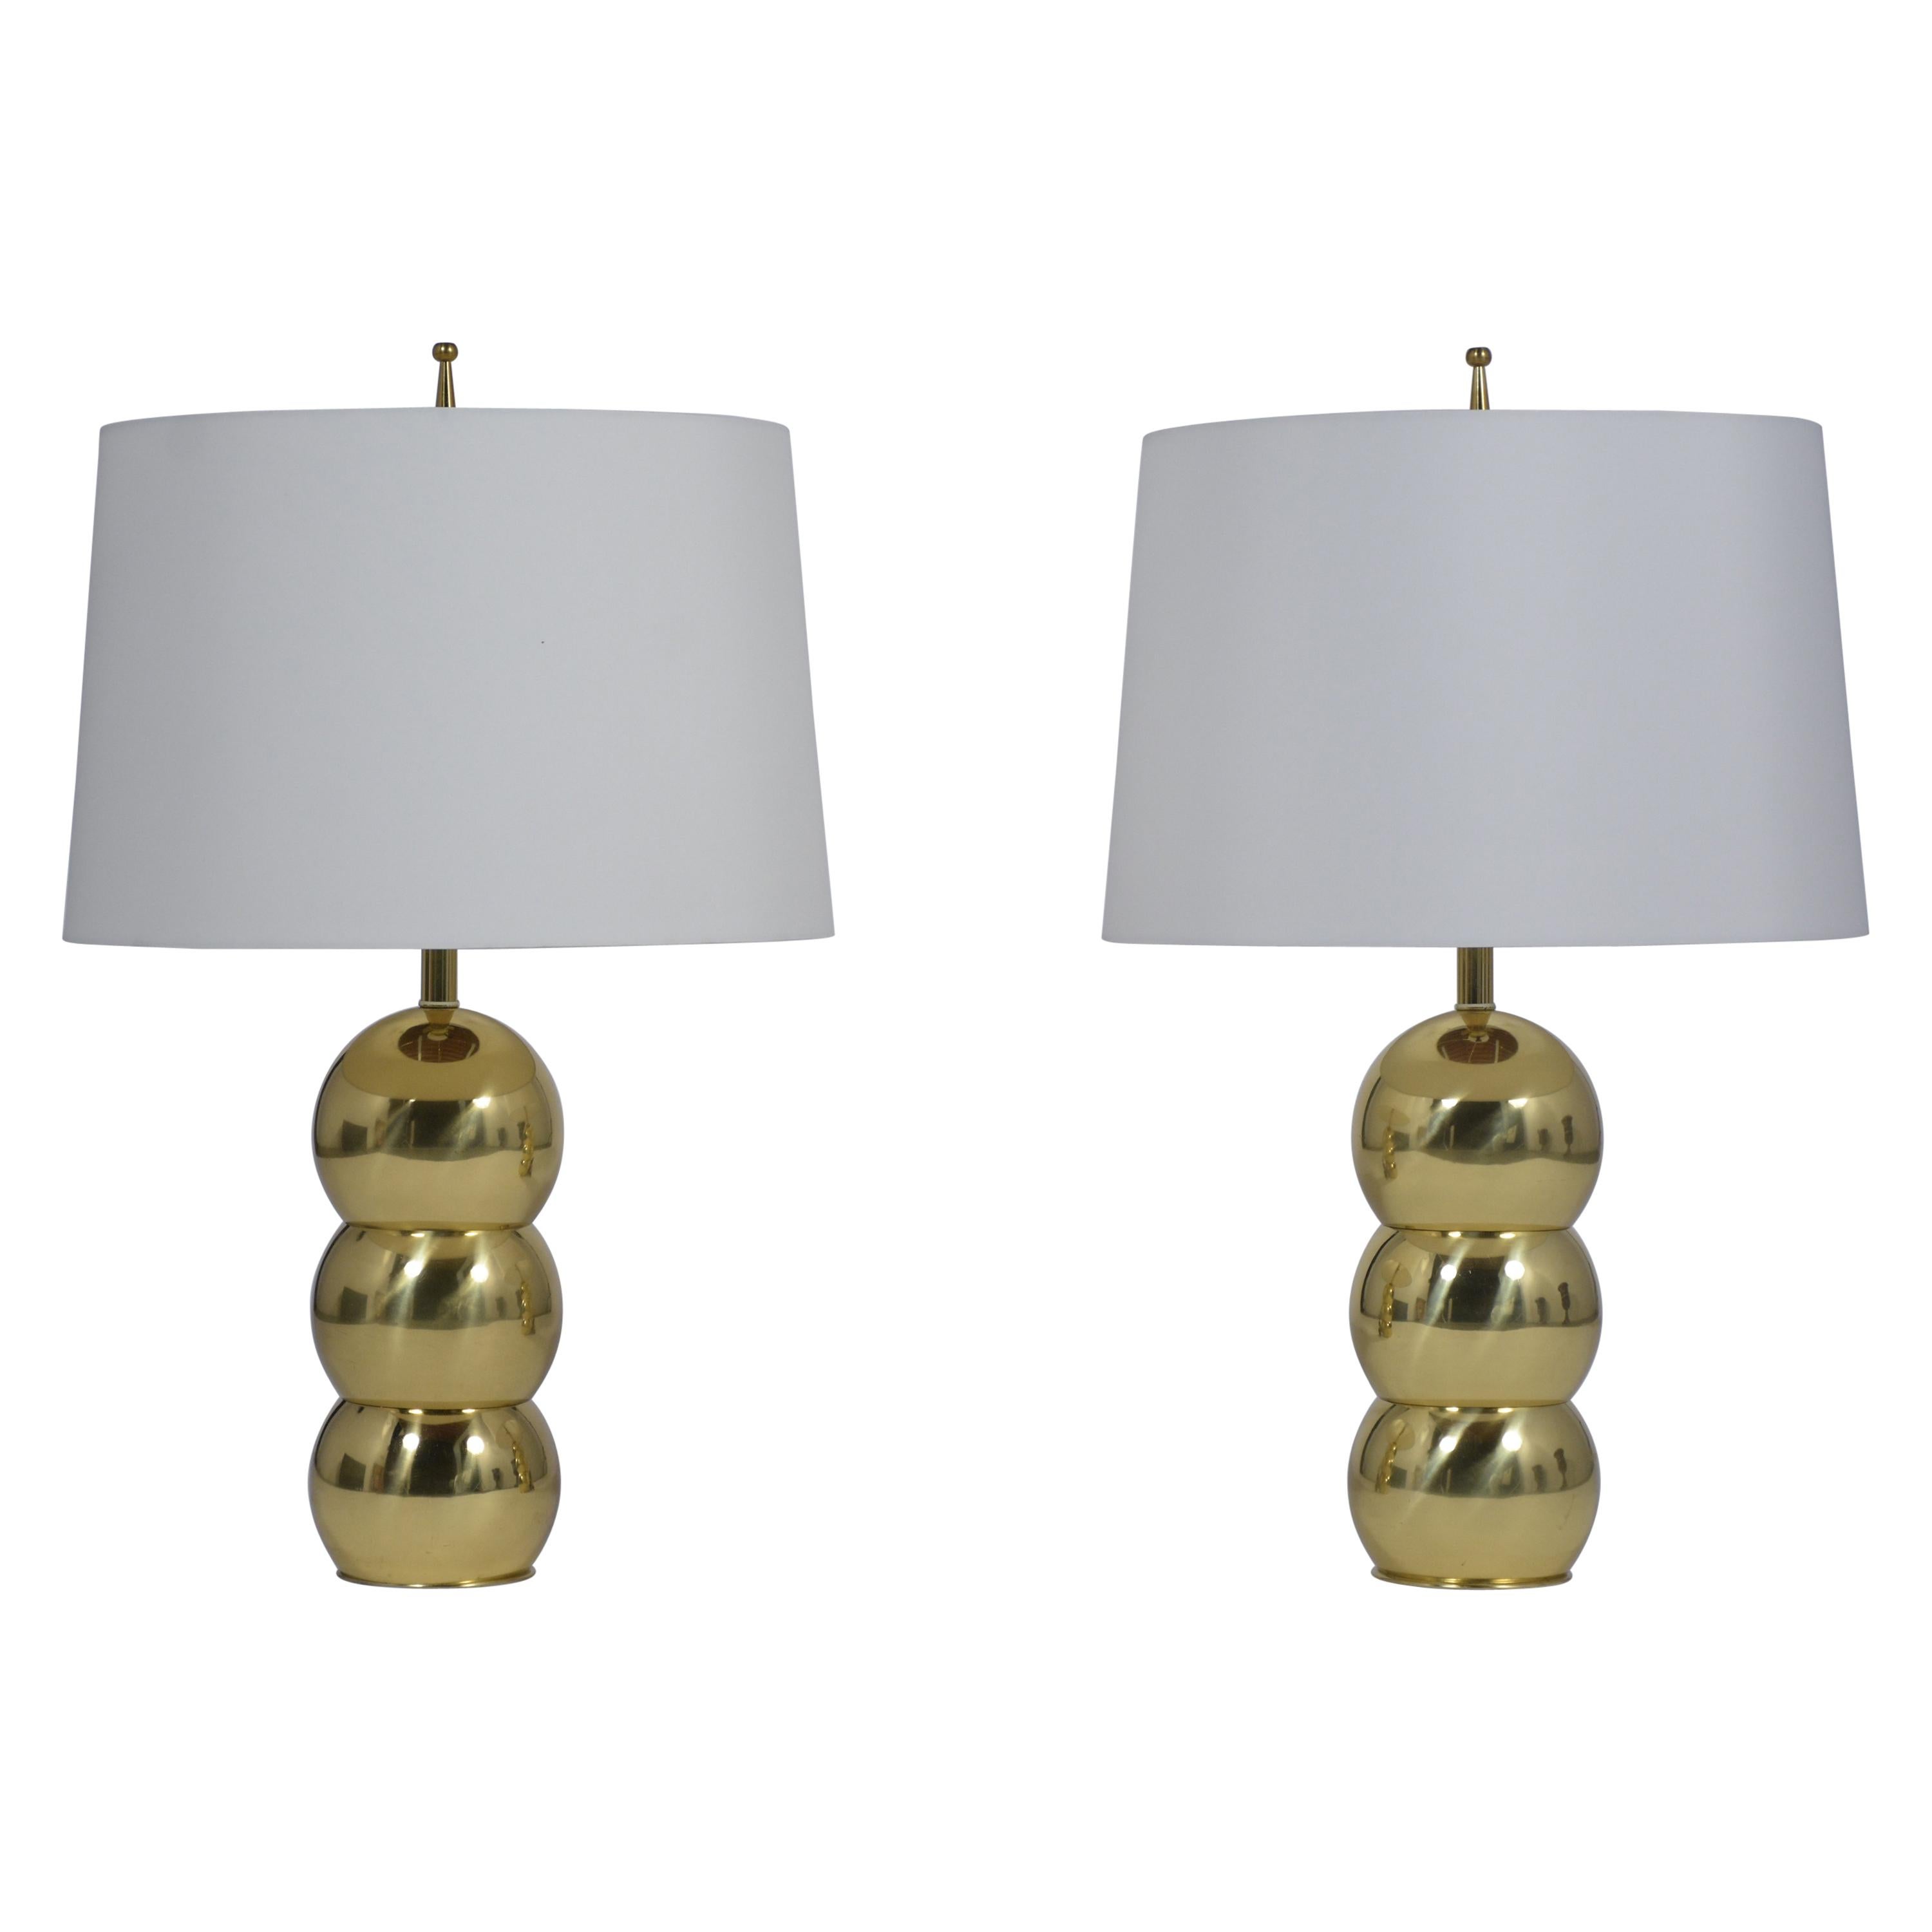 Pair of Lamps by George Kovacs